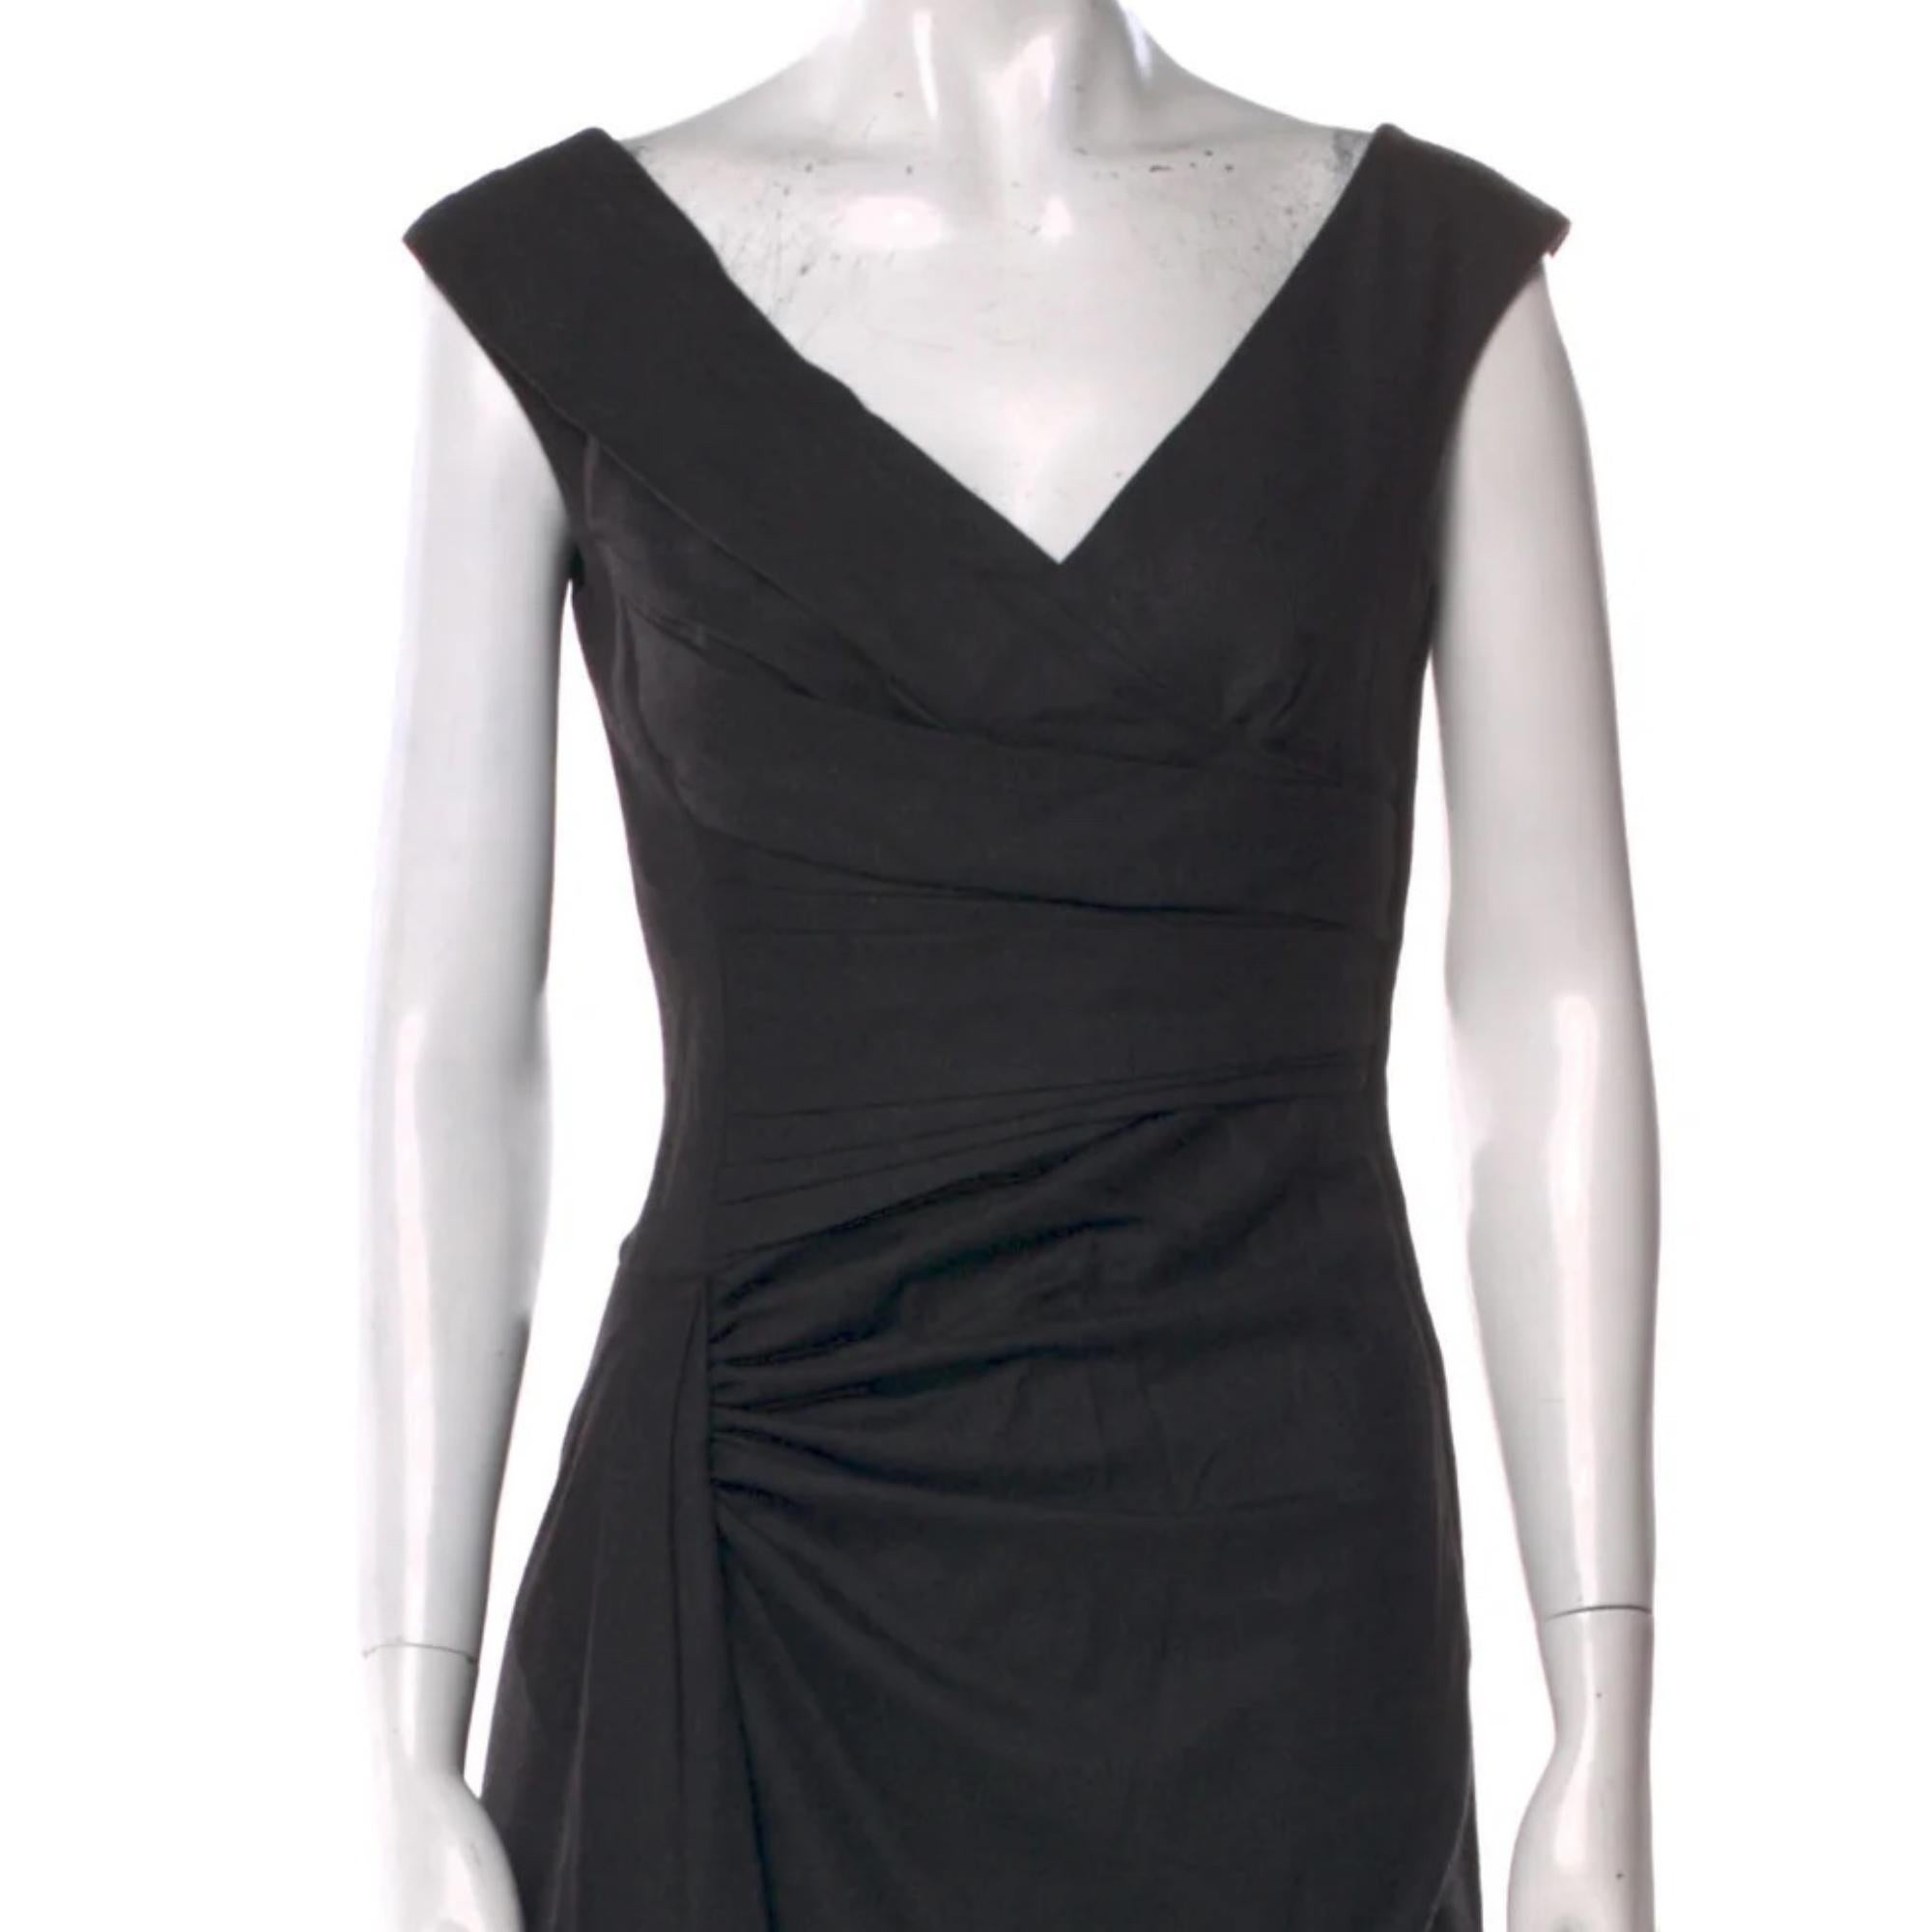 Valentino Virgin Wool Black Knee-Length Dress (Size: S  US 4) In Excellent Condition For Sale In Montreal, Quebec